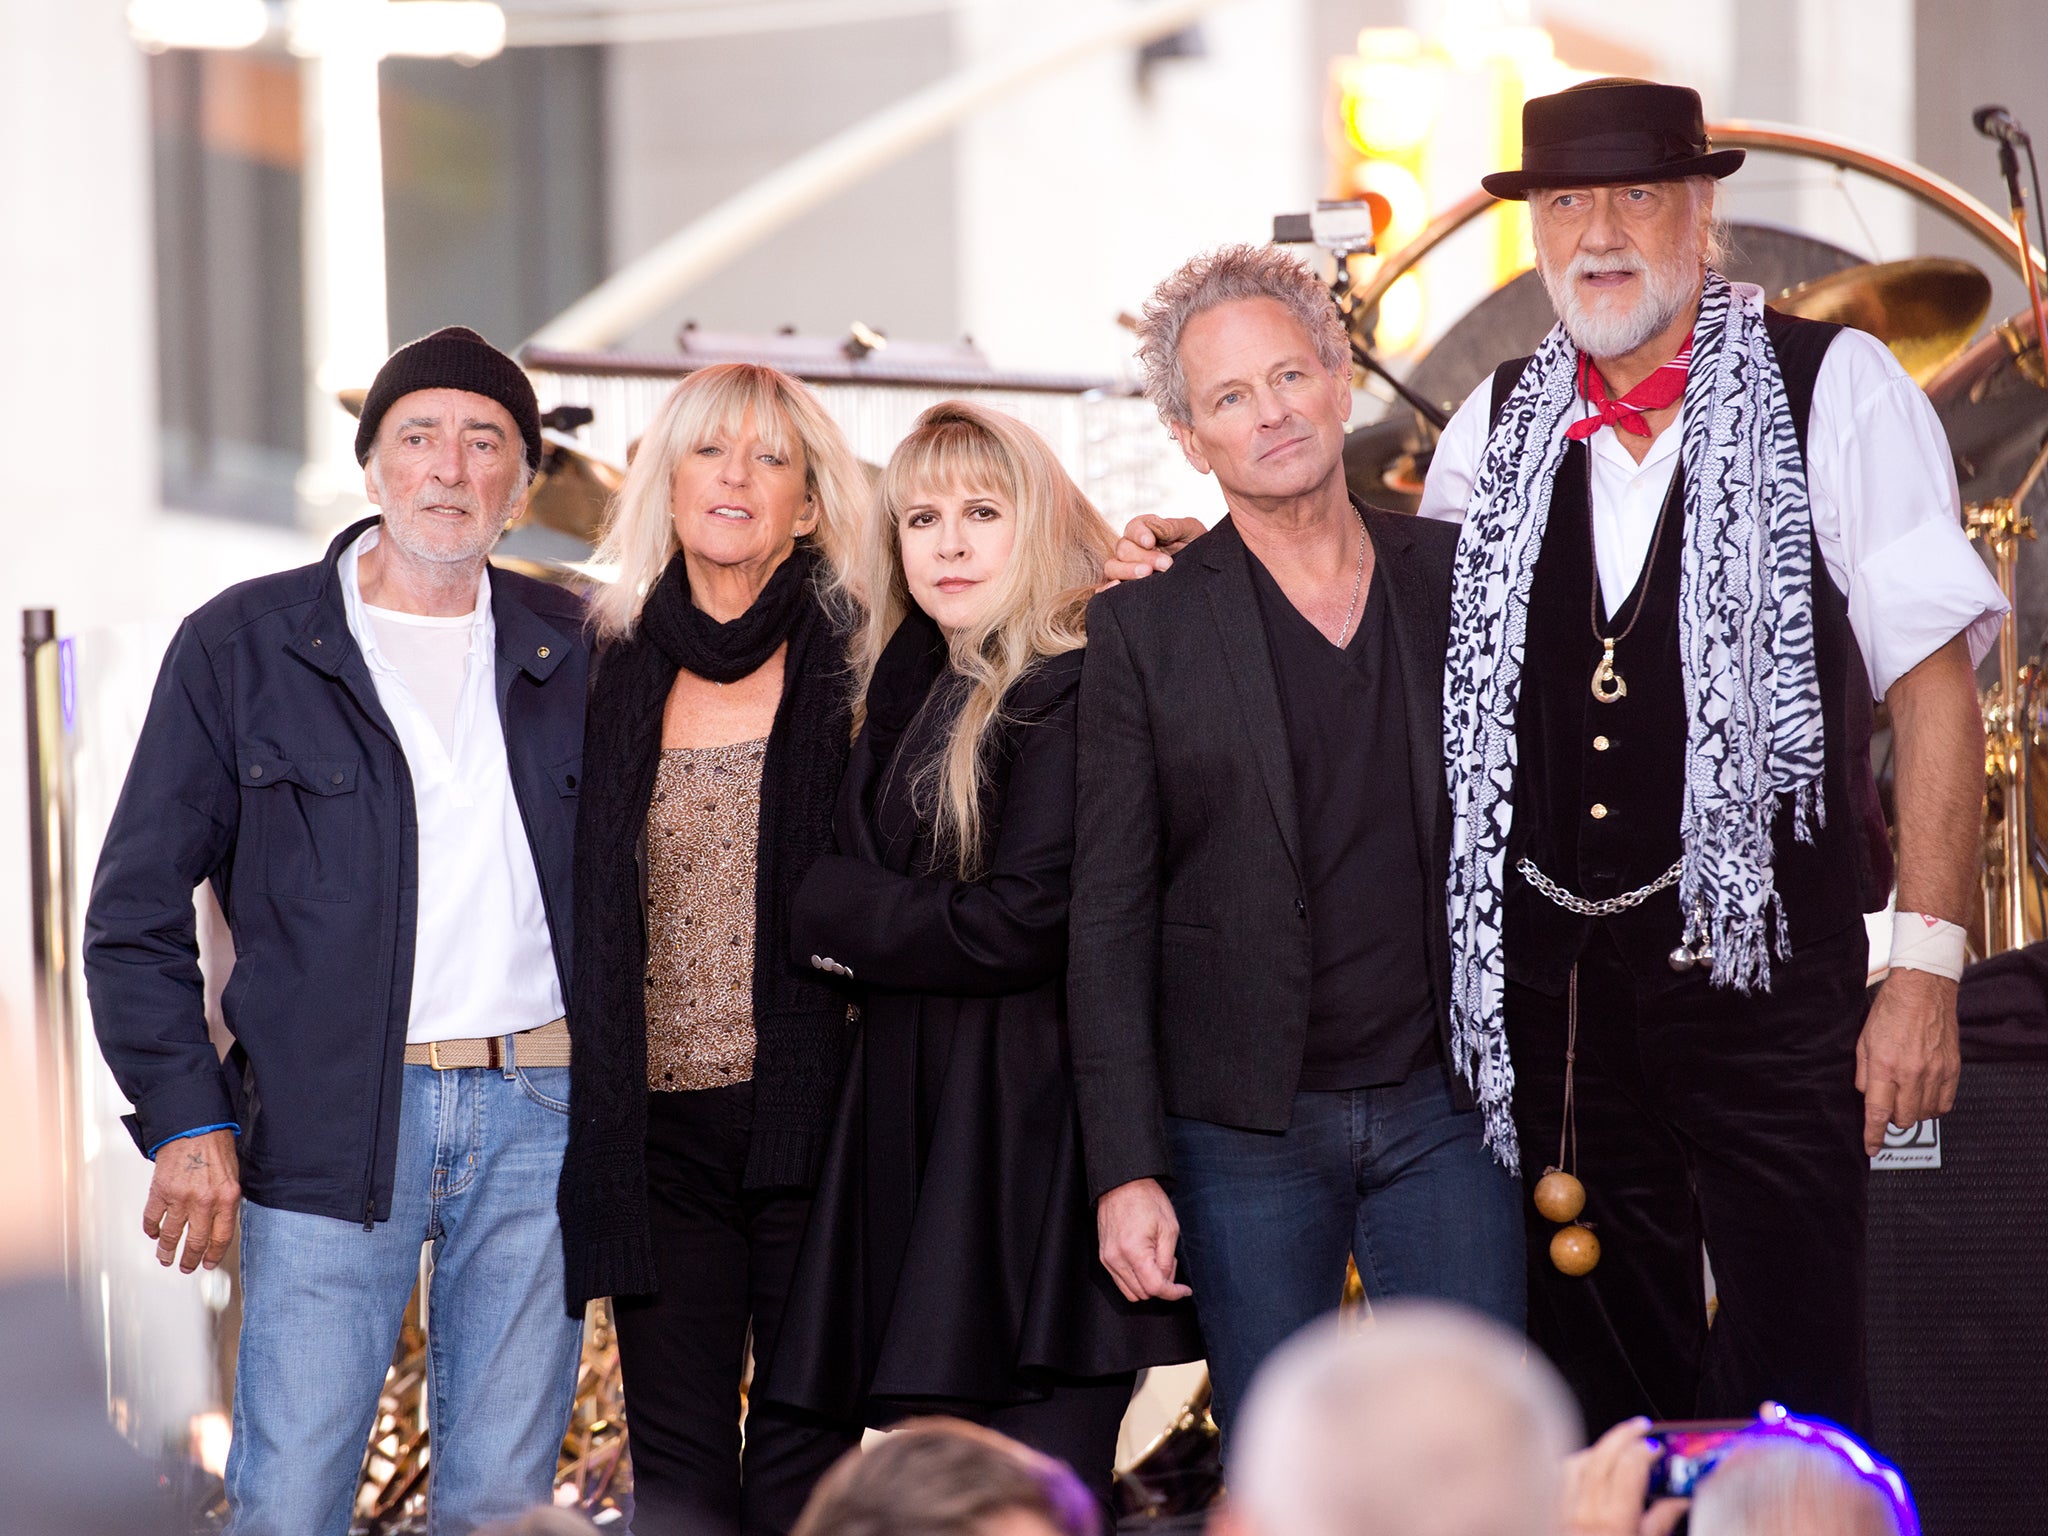 Fleetwood Mac – John and Christine McVie, Stevie Nicks, Lindsey Buckingham and Mick Fleetwood – plans to tour again in 2018